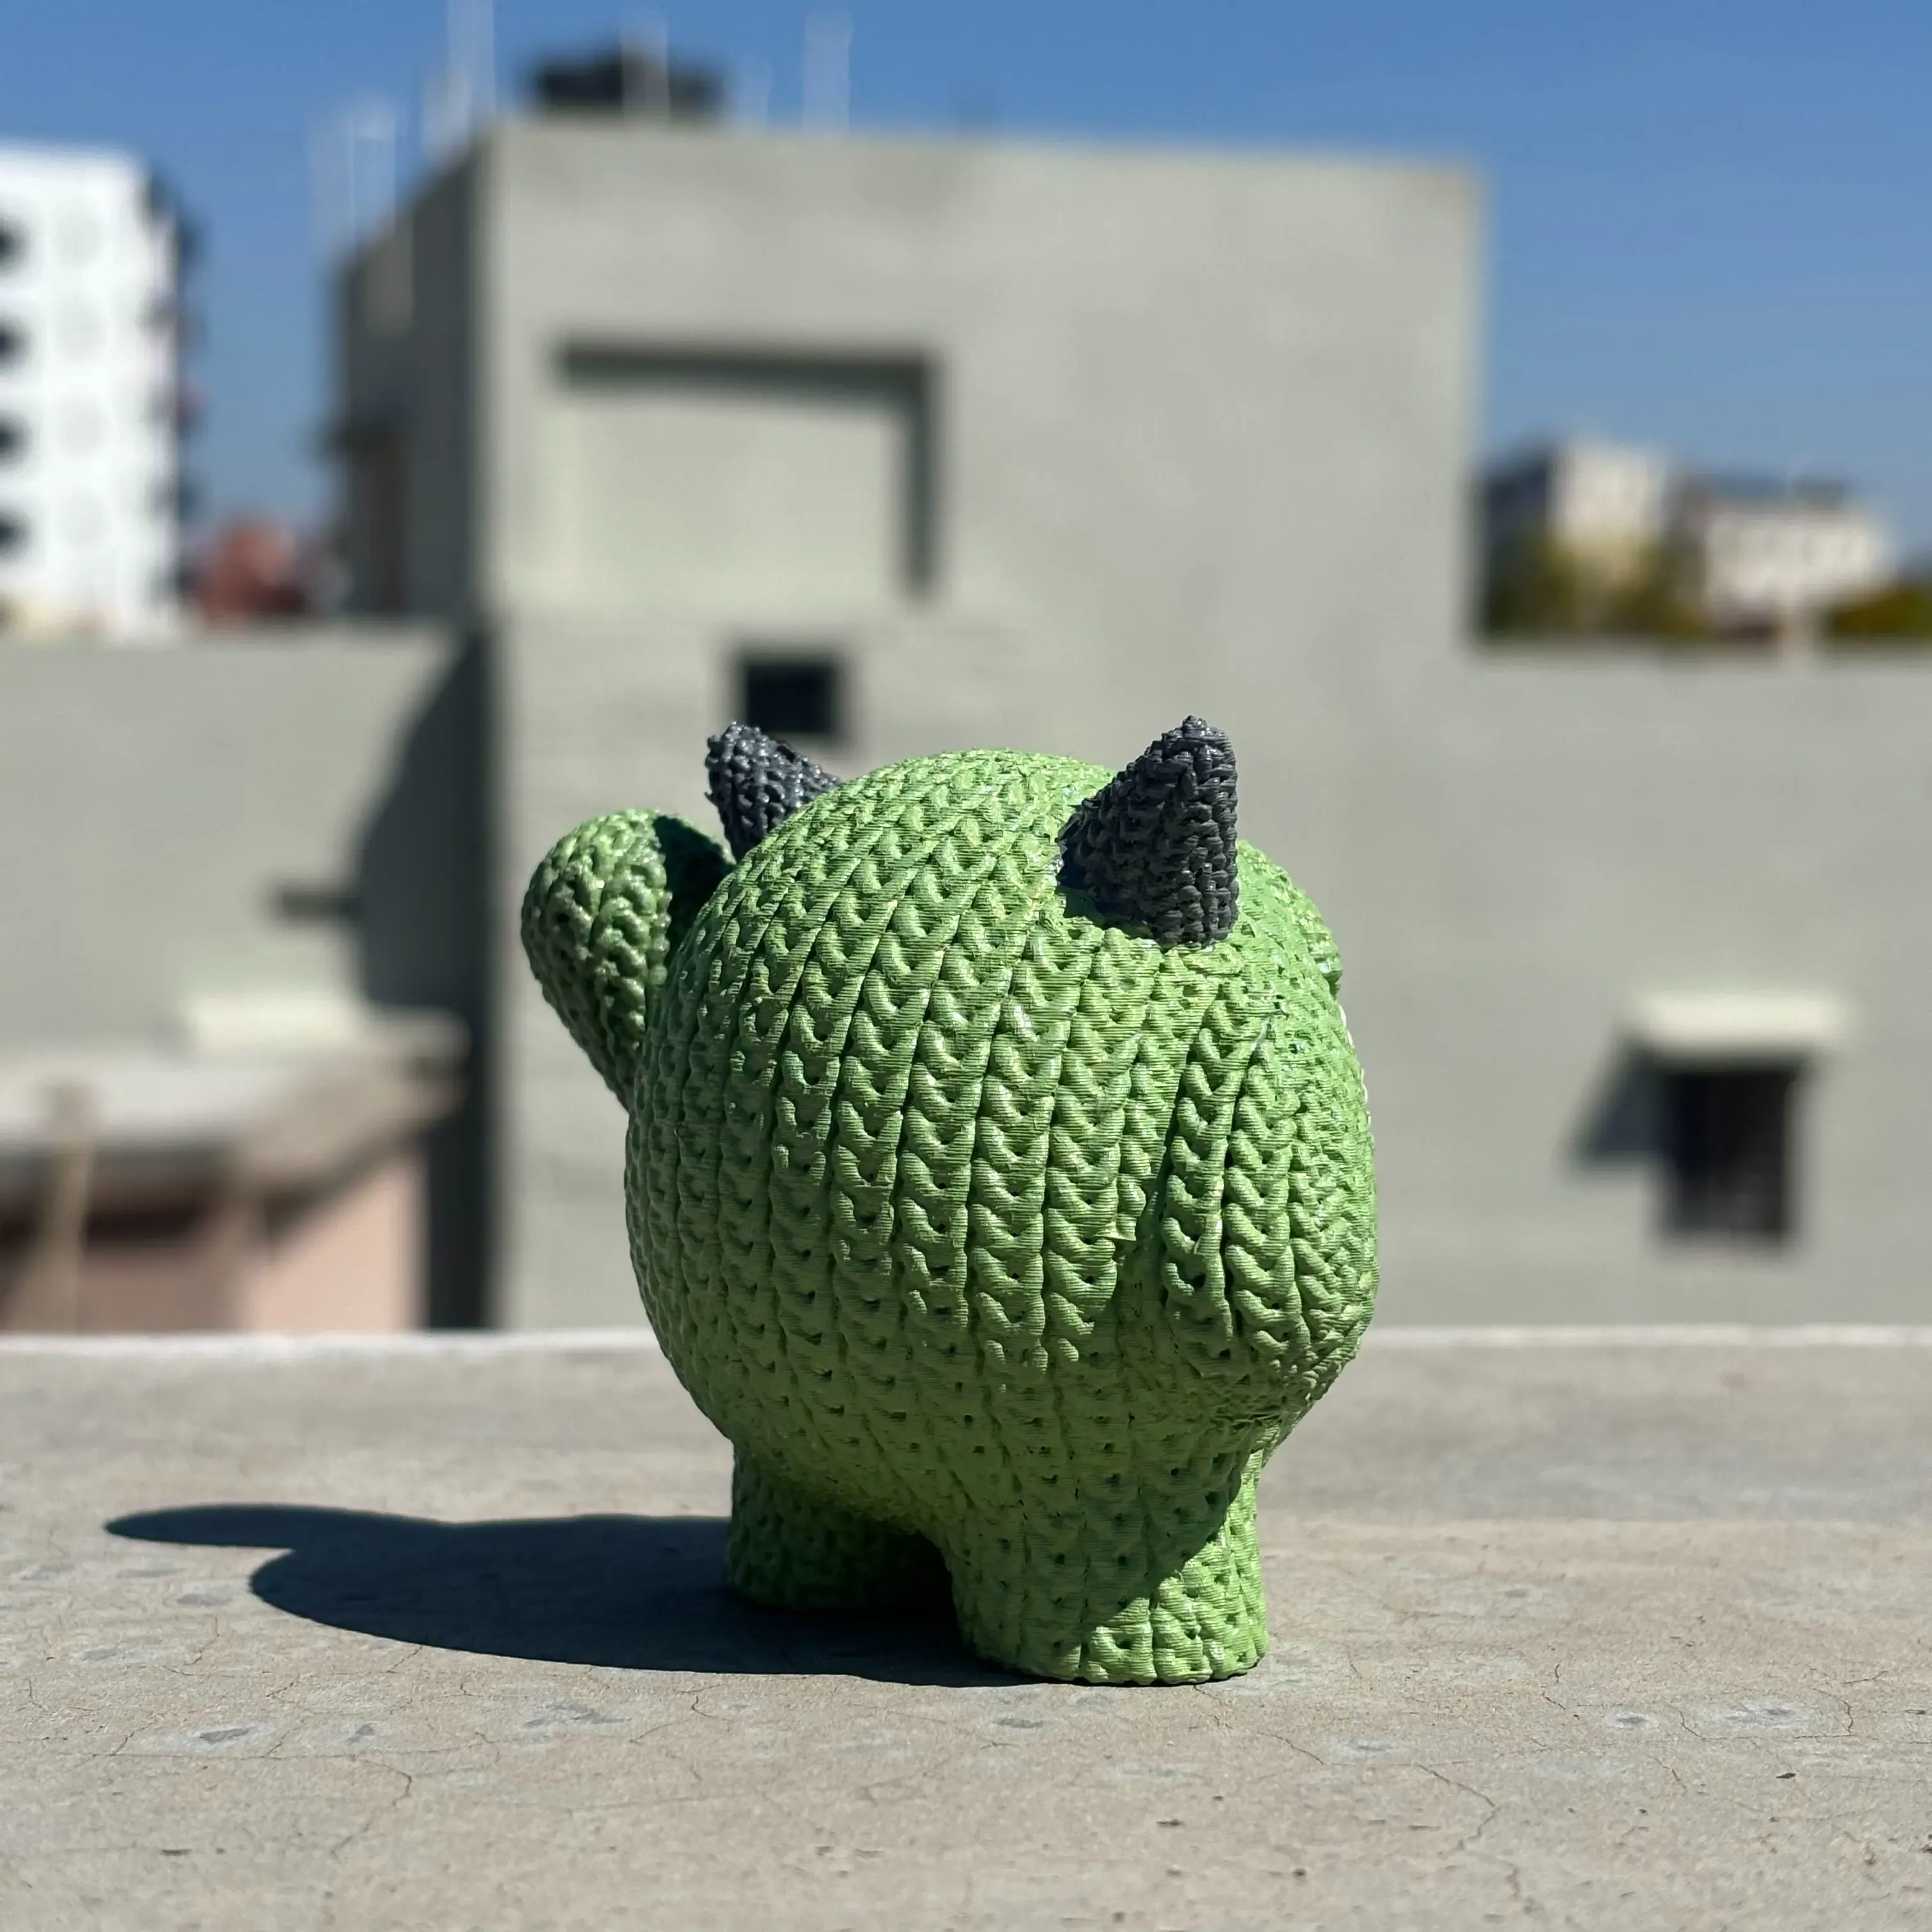 Knitted Mike Wazowski (Monsters Inc.)